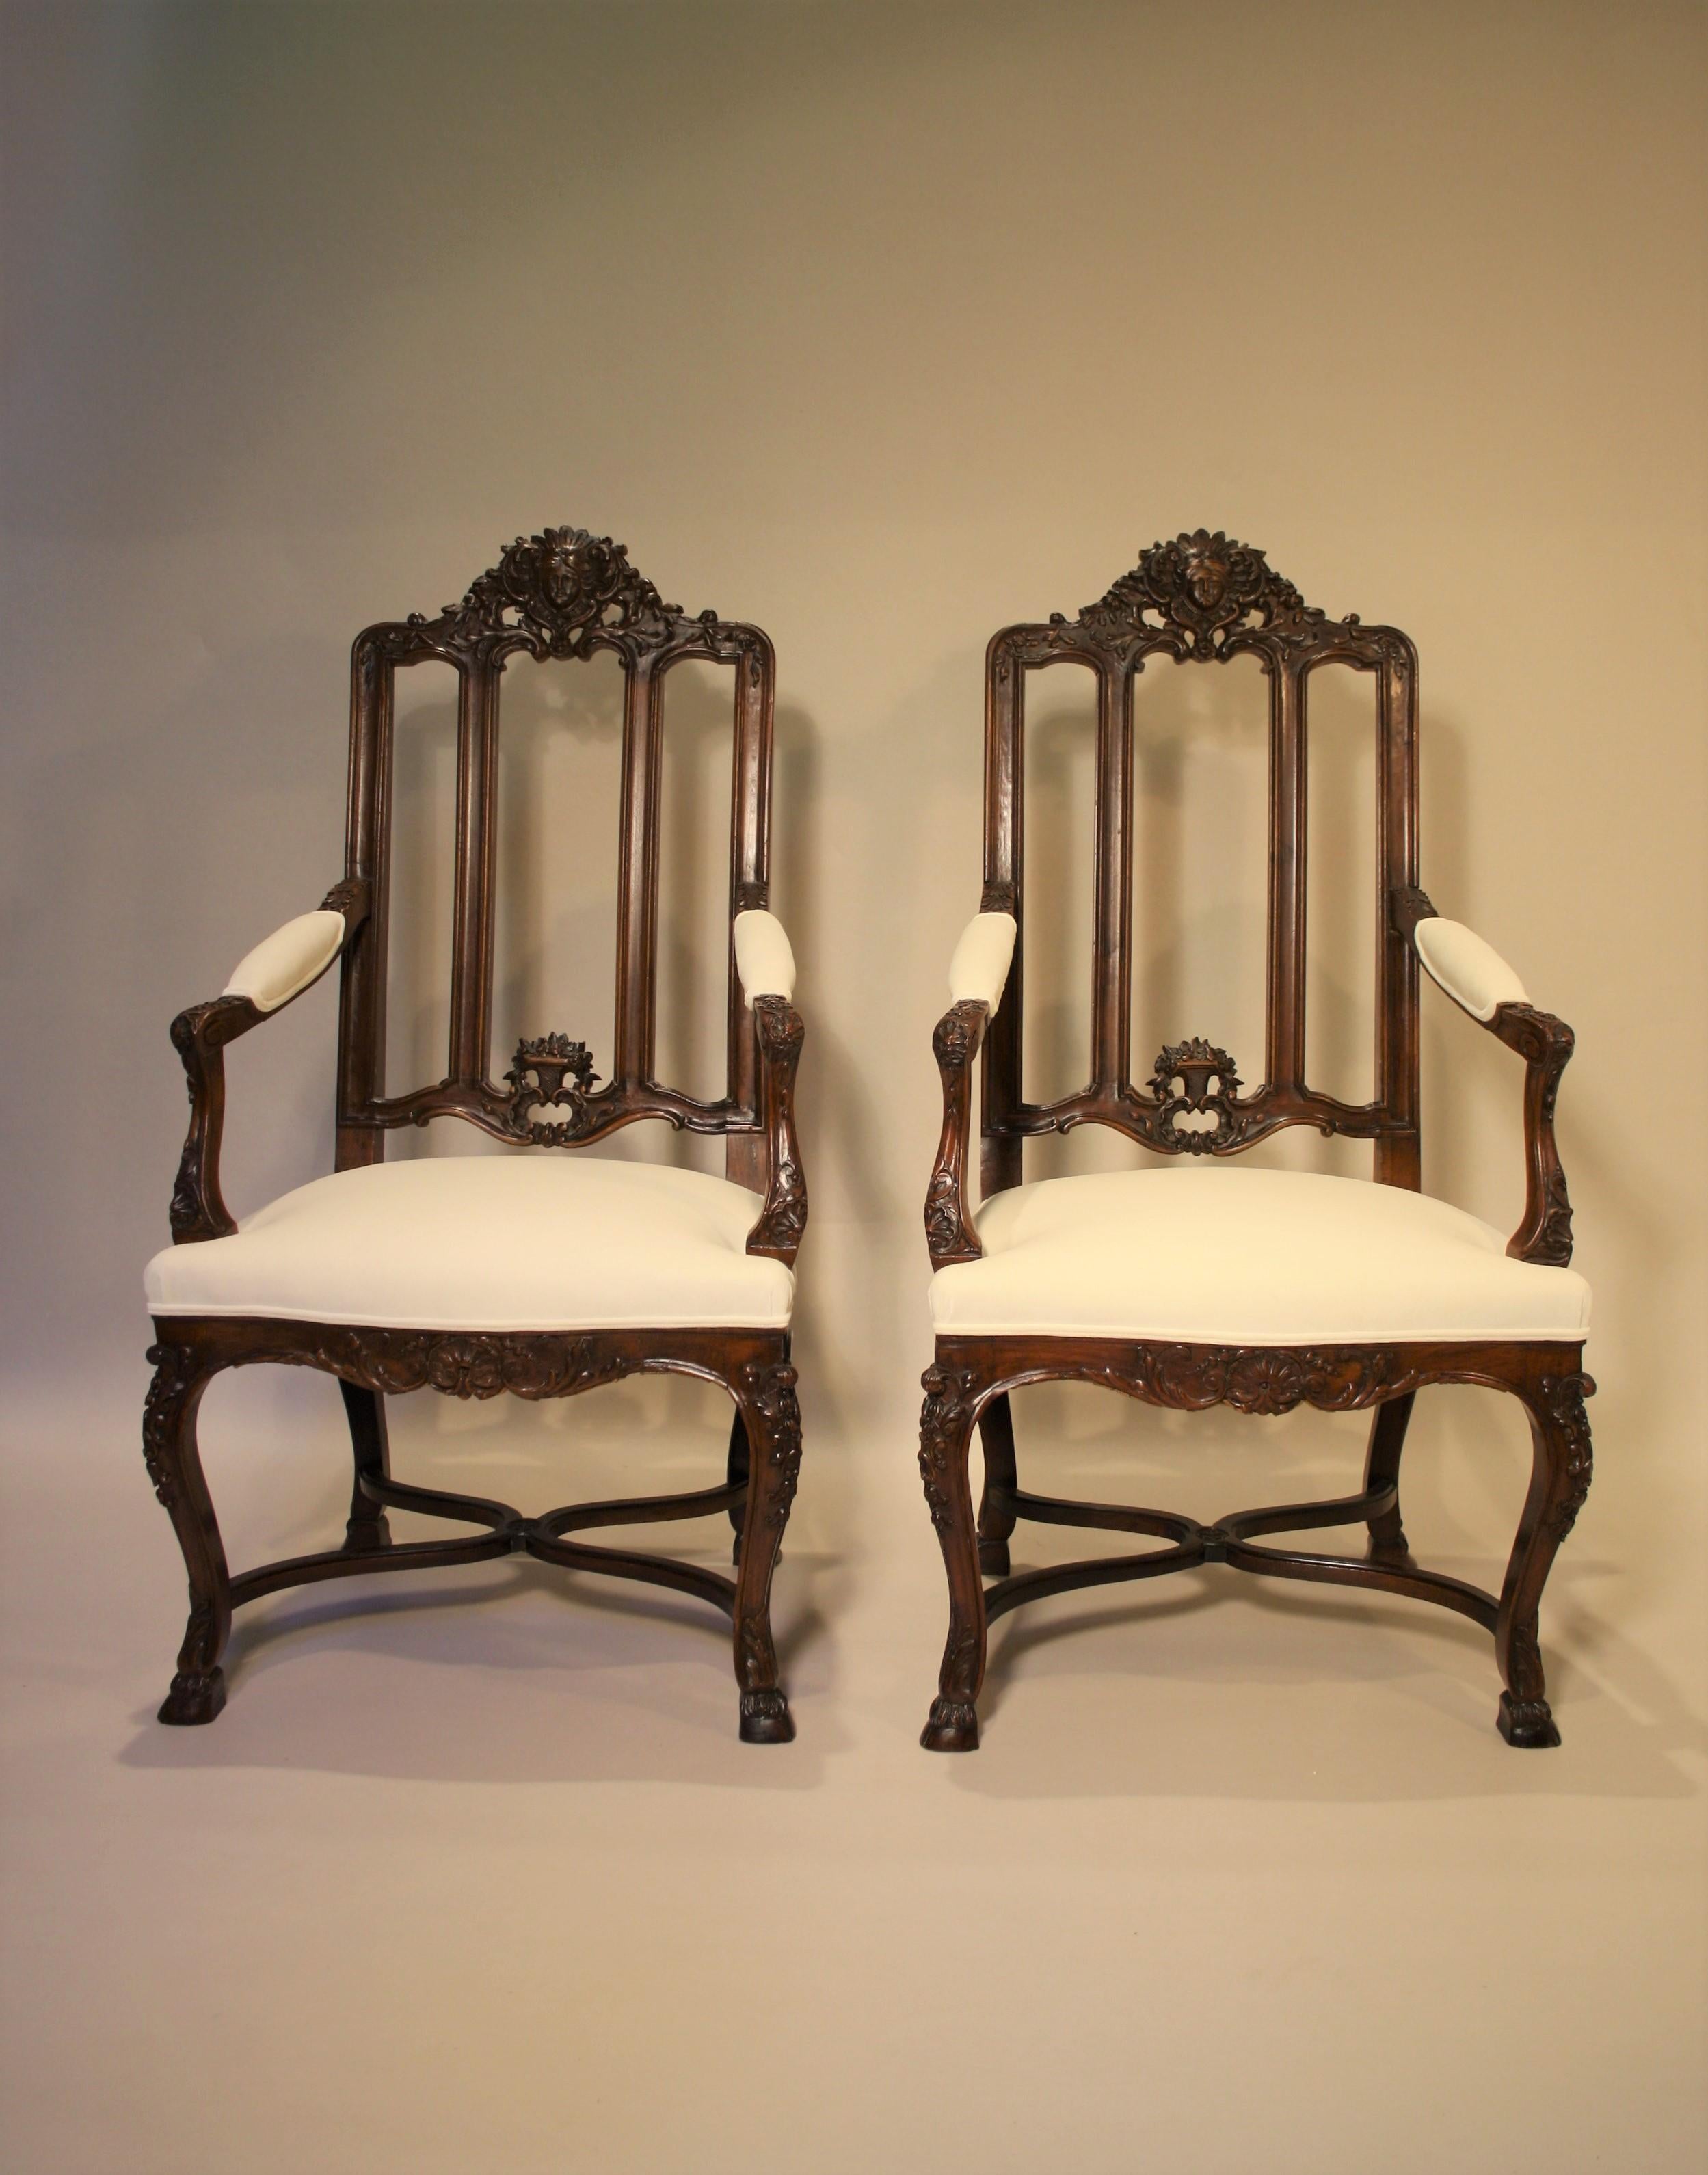 Exceptional pair of 19th century French walnut armchairs.
They are richly sculpted with acanthus leaves, shells, and a head of a goddess.
These chairs were made in a Parisian Workshop and come from the Castle of Fanson in the Belgian Ardennes (About